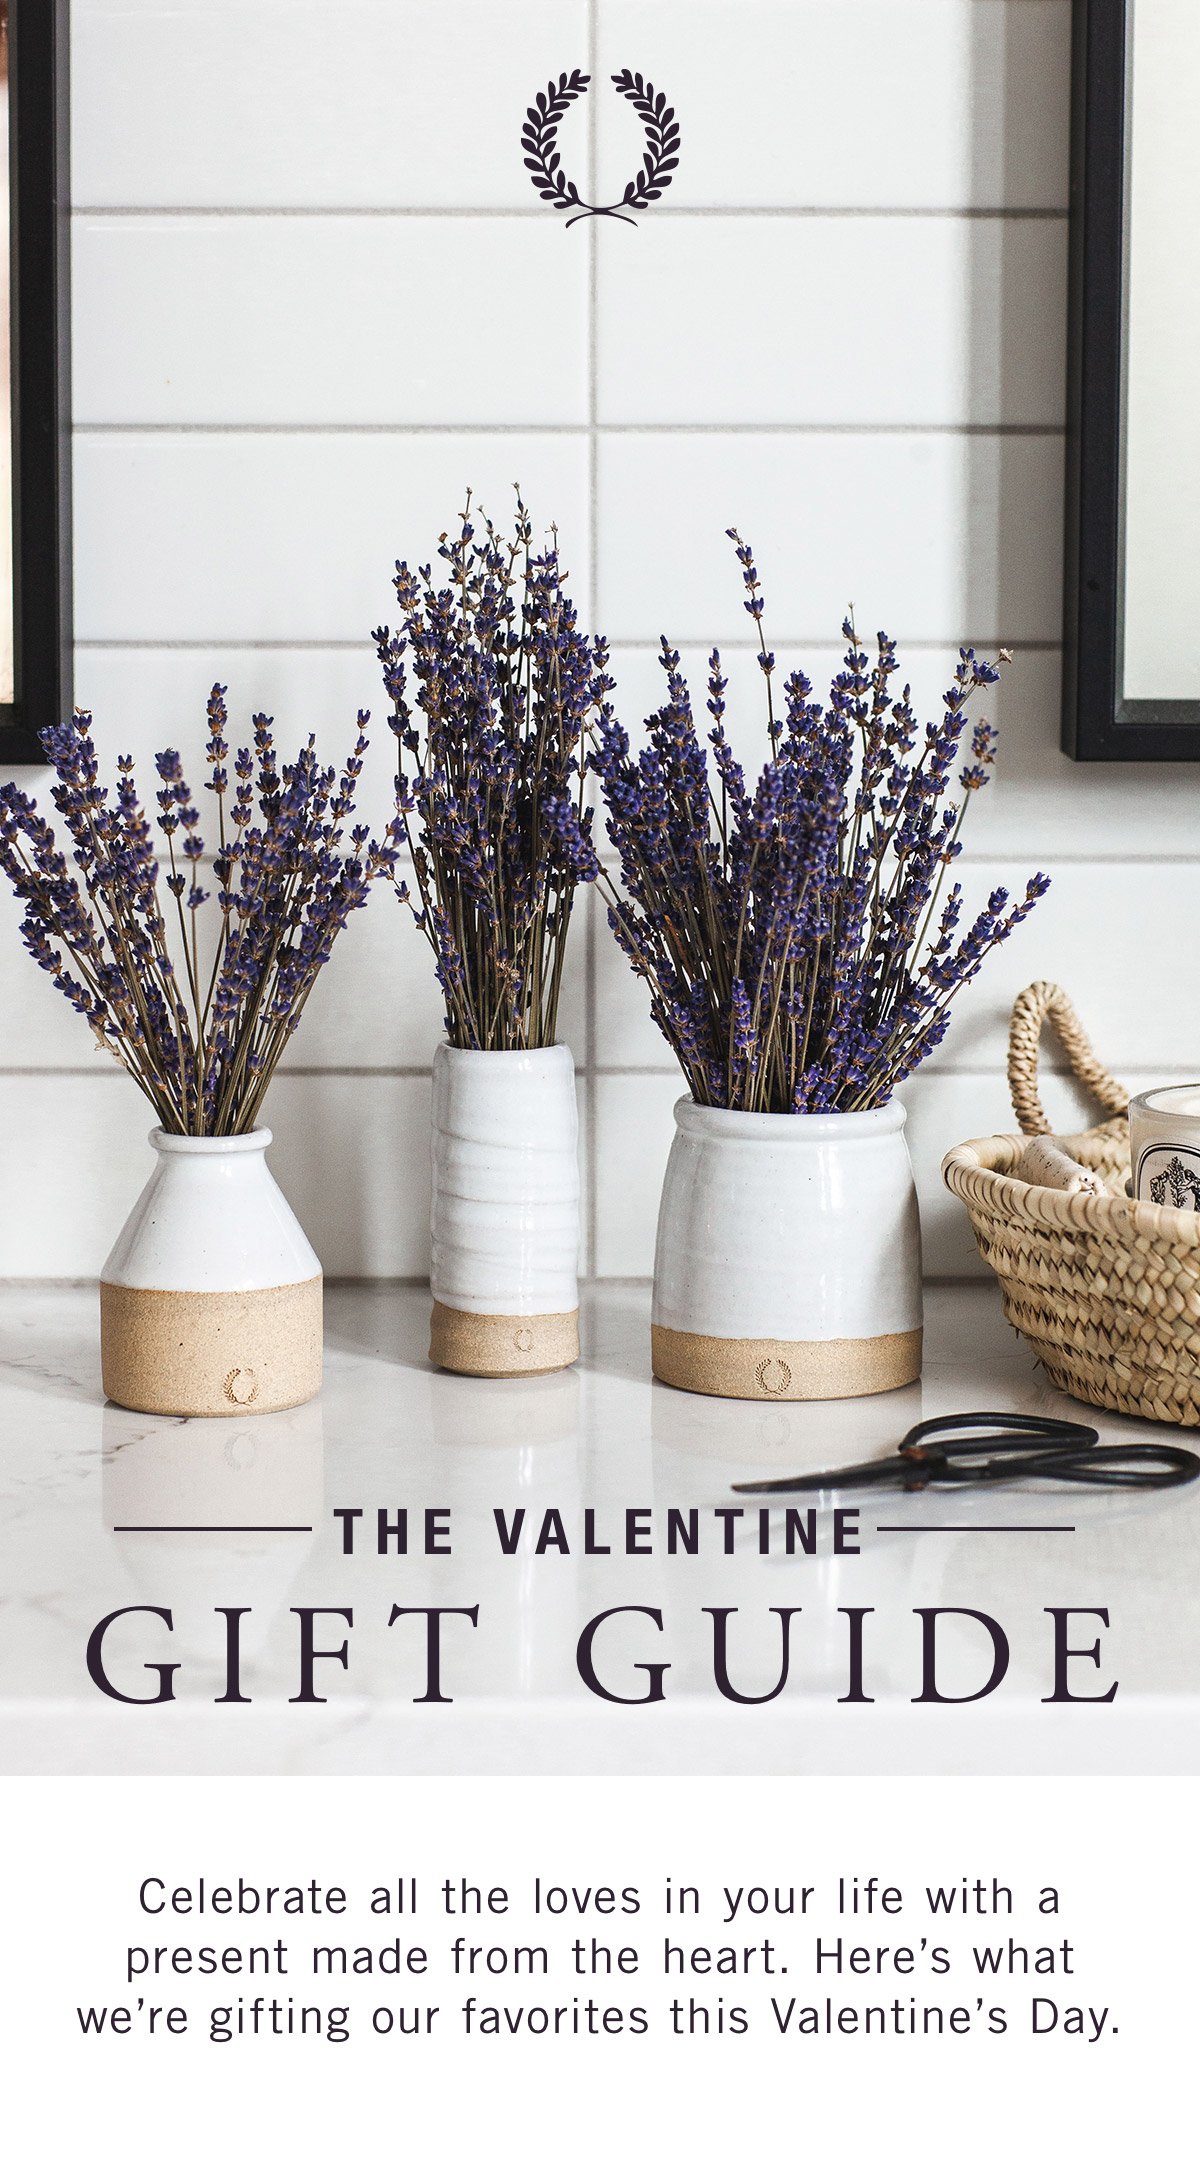 The Valentine Shop - A Gift Guide